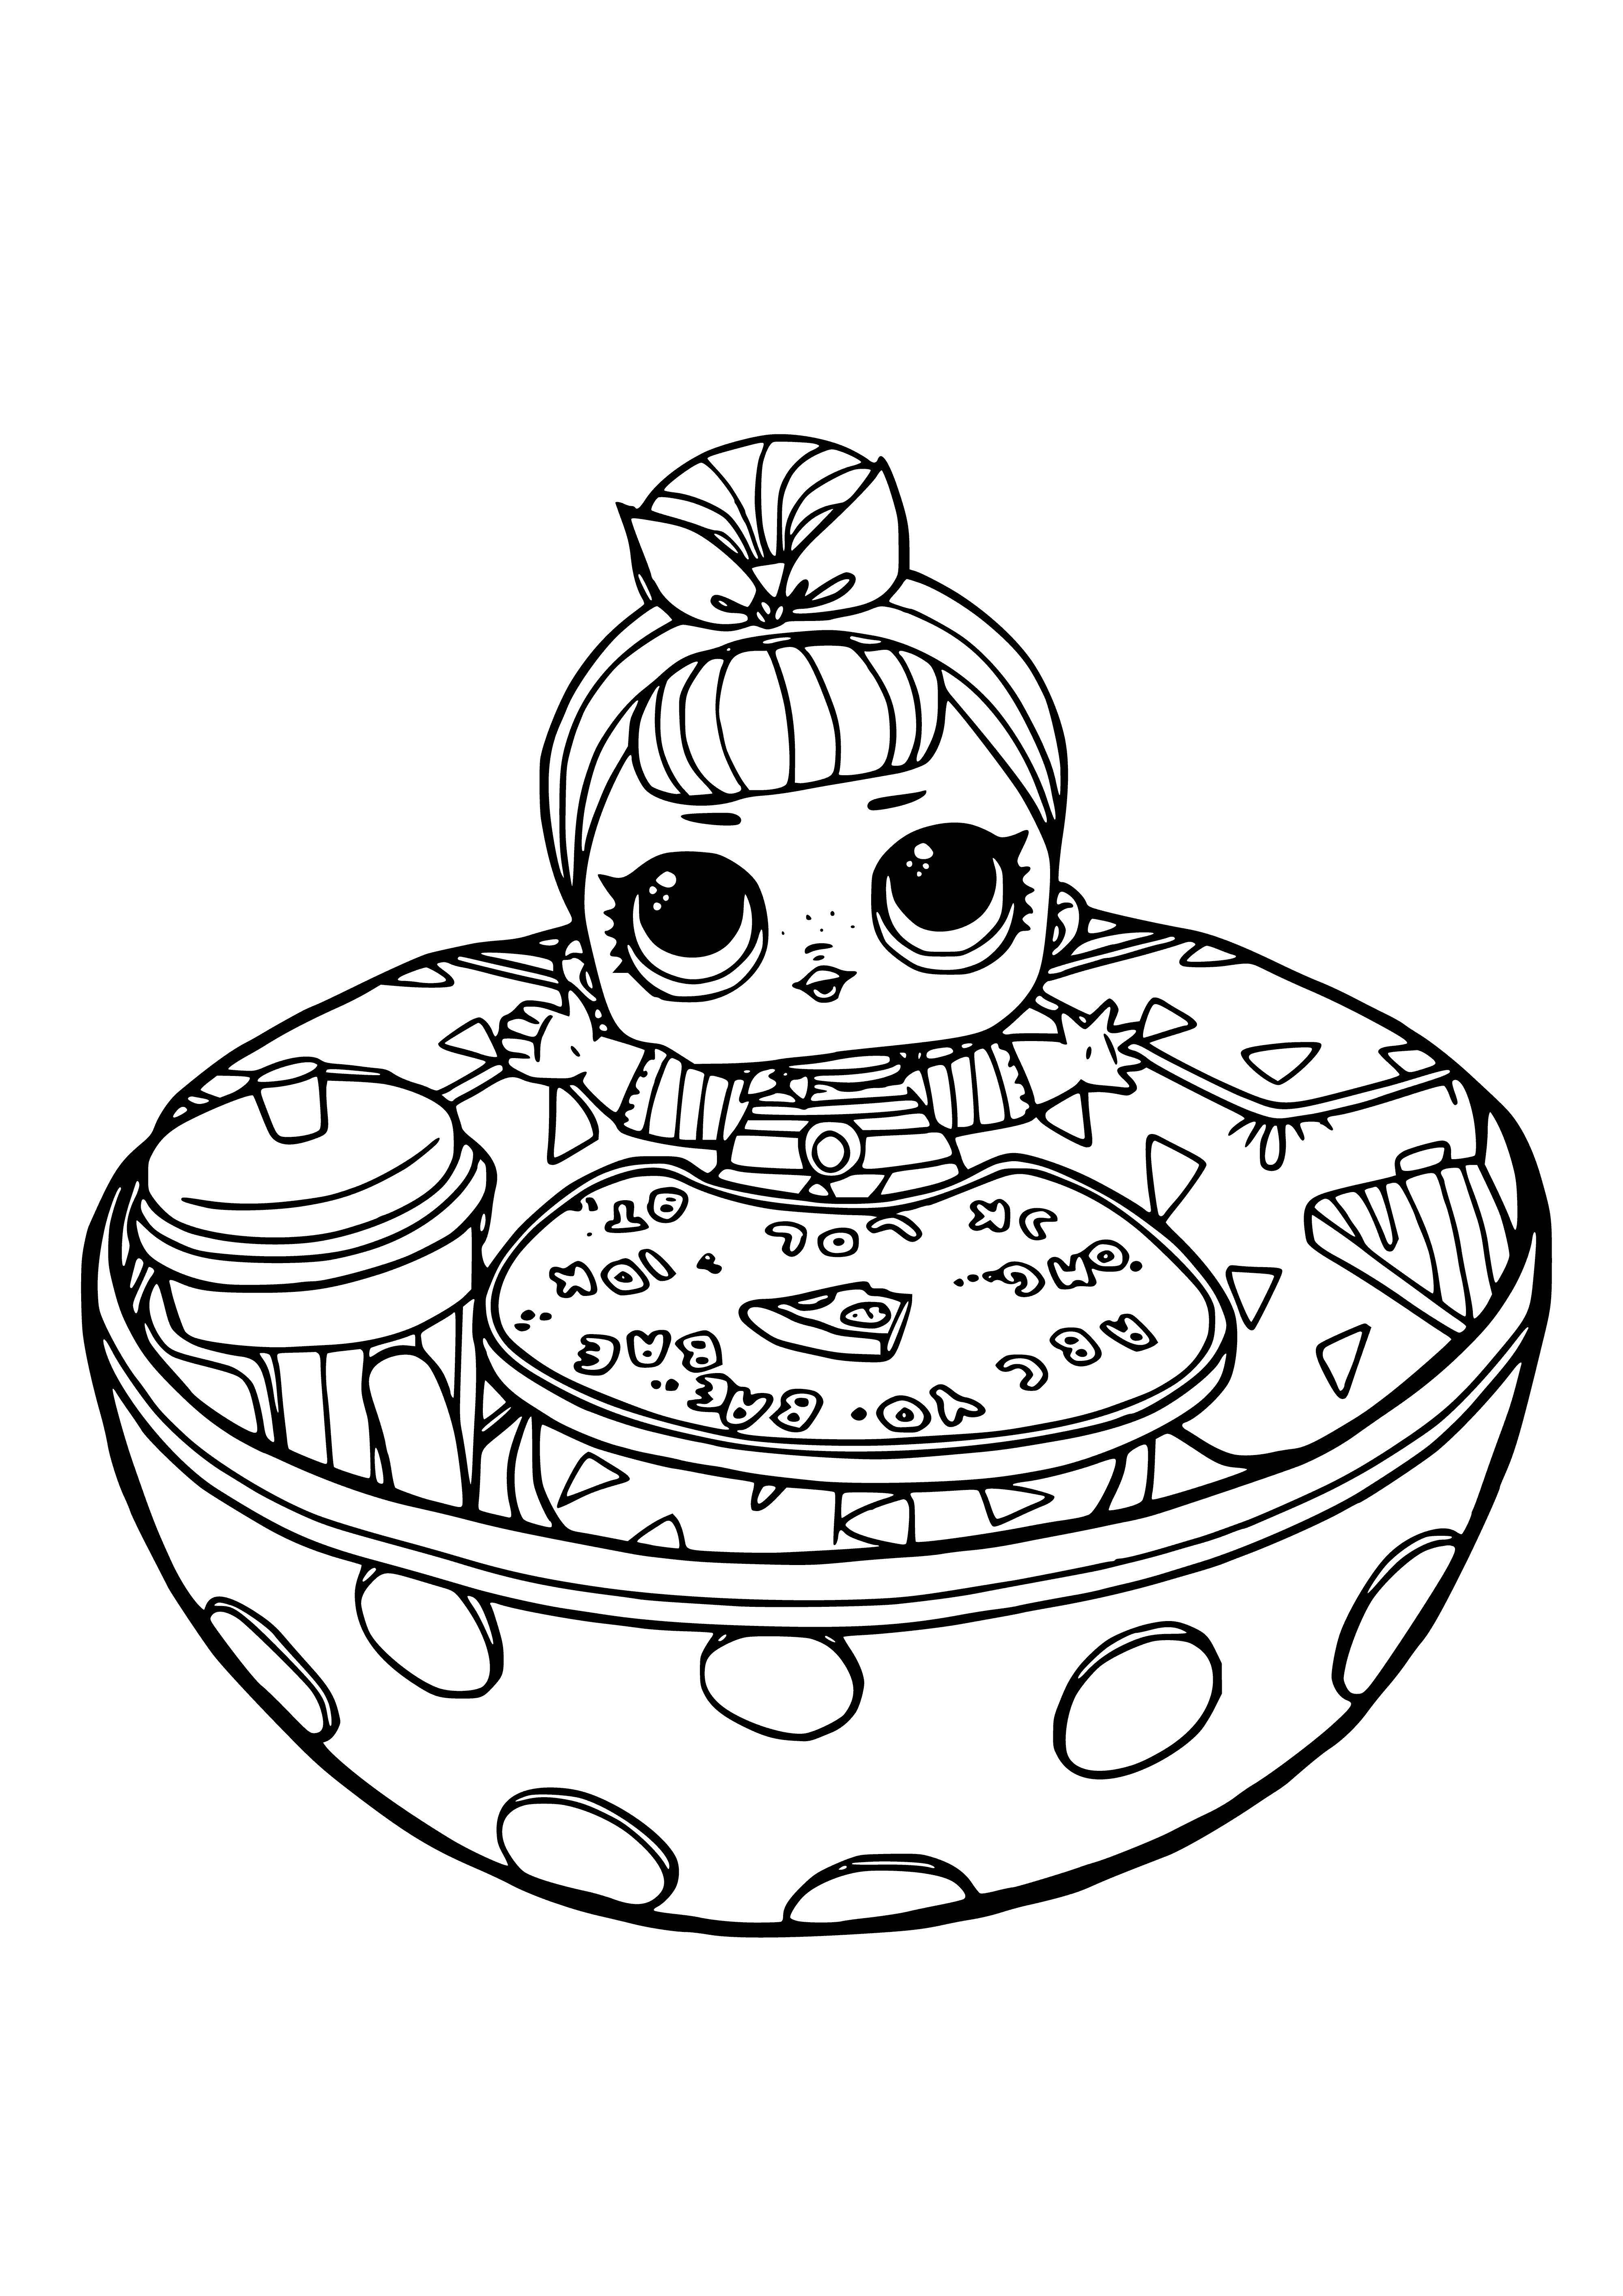 coloring page: Baby sitting in a ball, giggling and taking in the world around them.